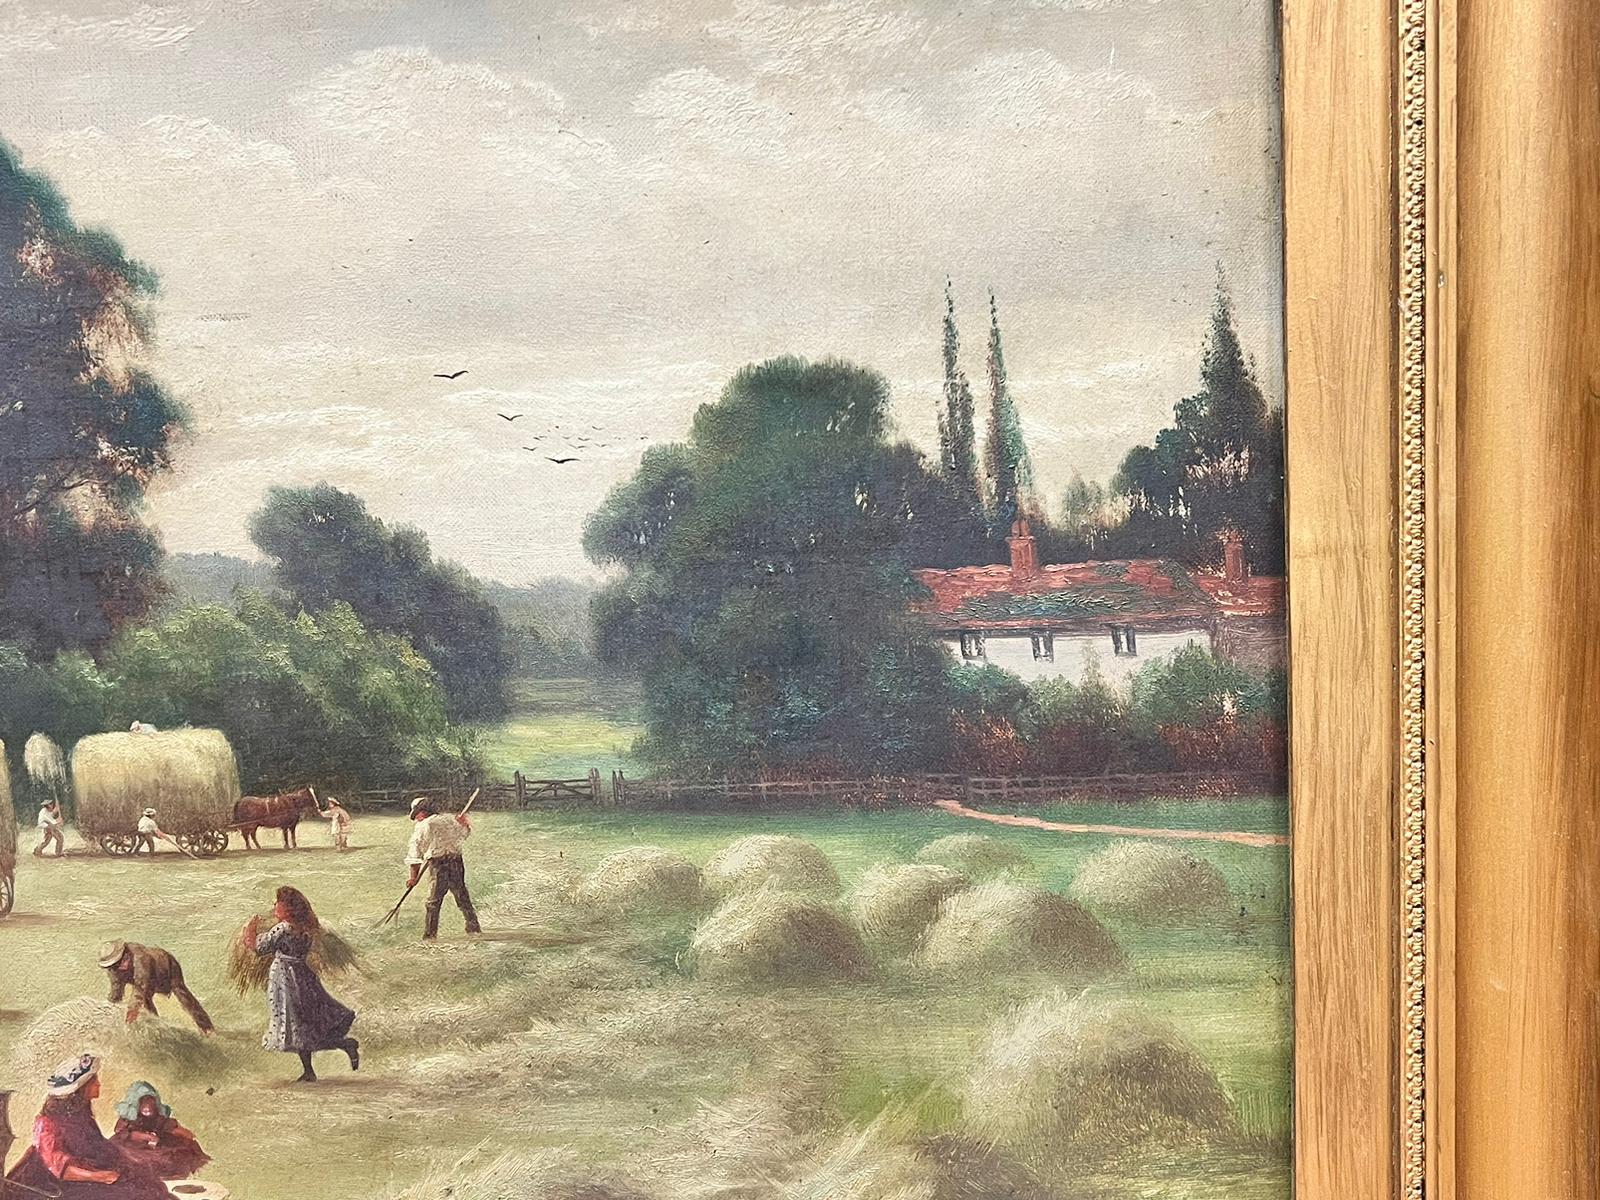 The Harvest
English School, late 19th century
oil on canvas, framed
framed: 28 x 38 inches
canvas: 20 x 30 inches
provenance: private collection, Suffolk, England
condition: very good and sound condition; please note we do not warranty the condition